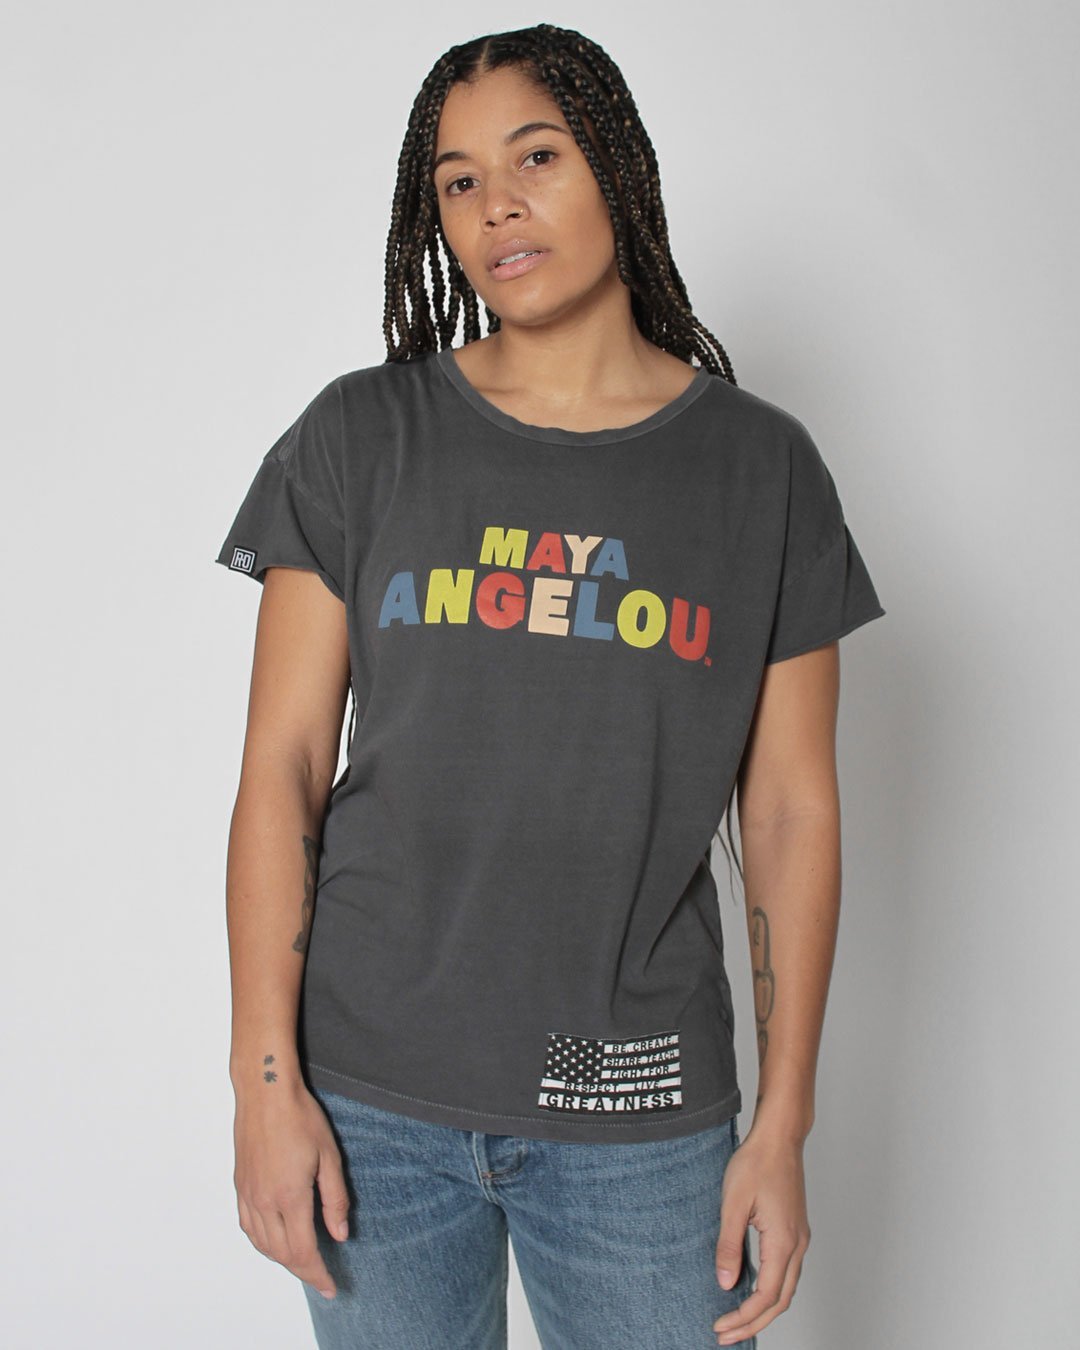 BHT - Maya Angelou Women's Tee - Roots of Inc dba Roots of Fight